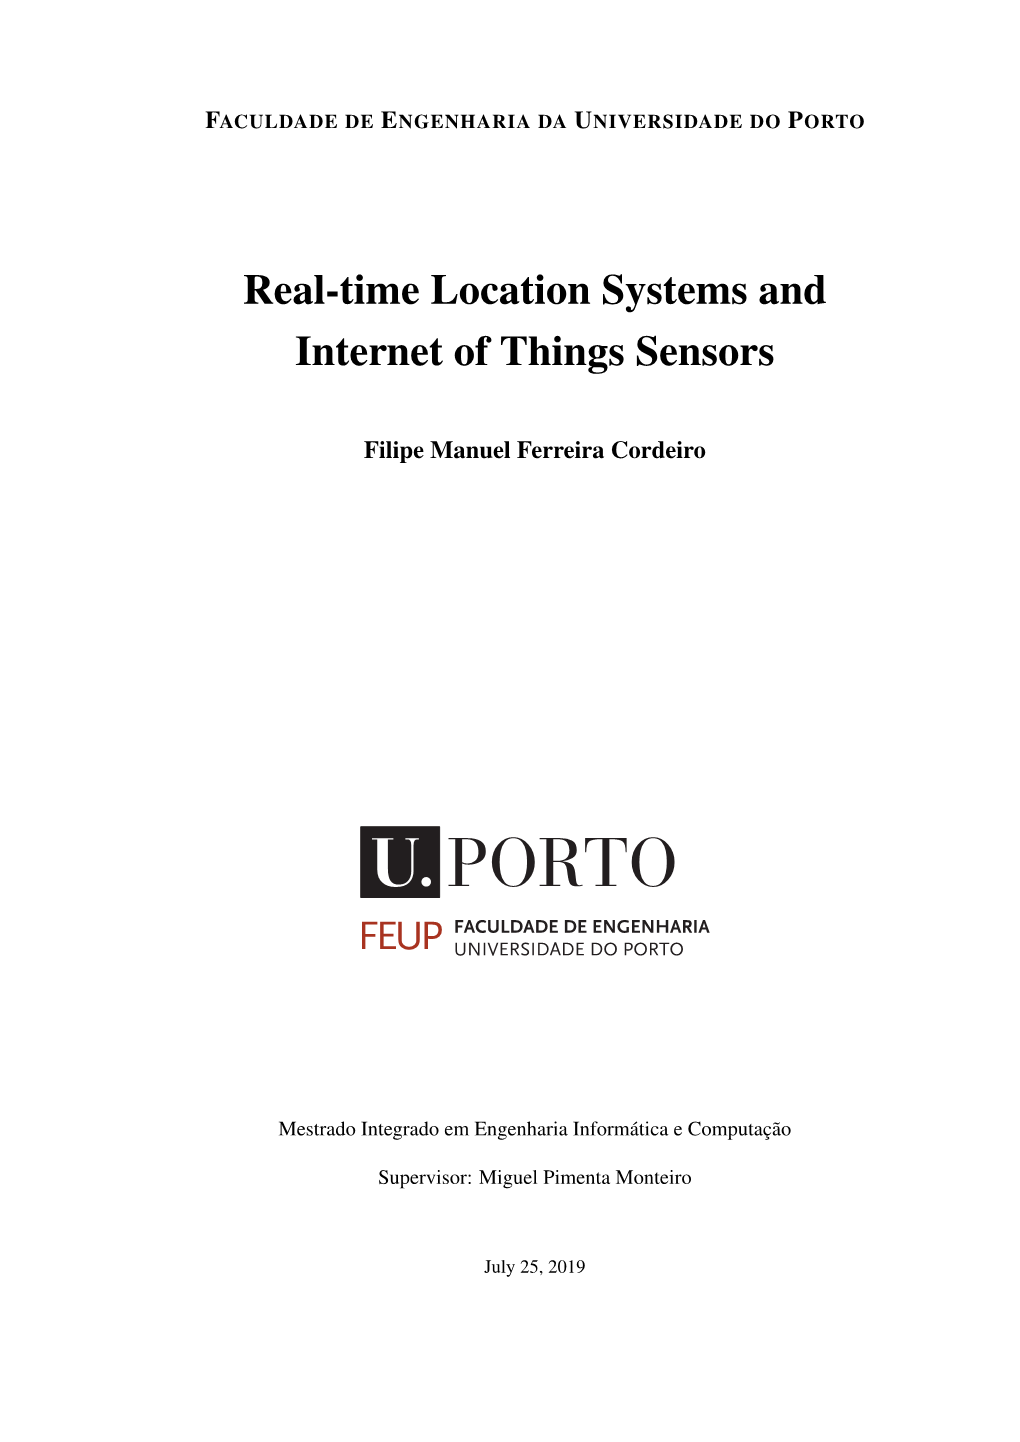 Real-Time Location Systems and Internet of Things Sensors